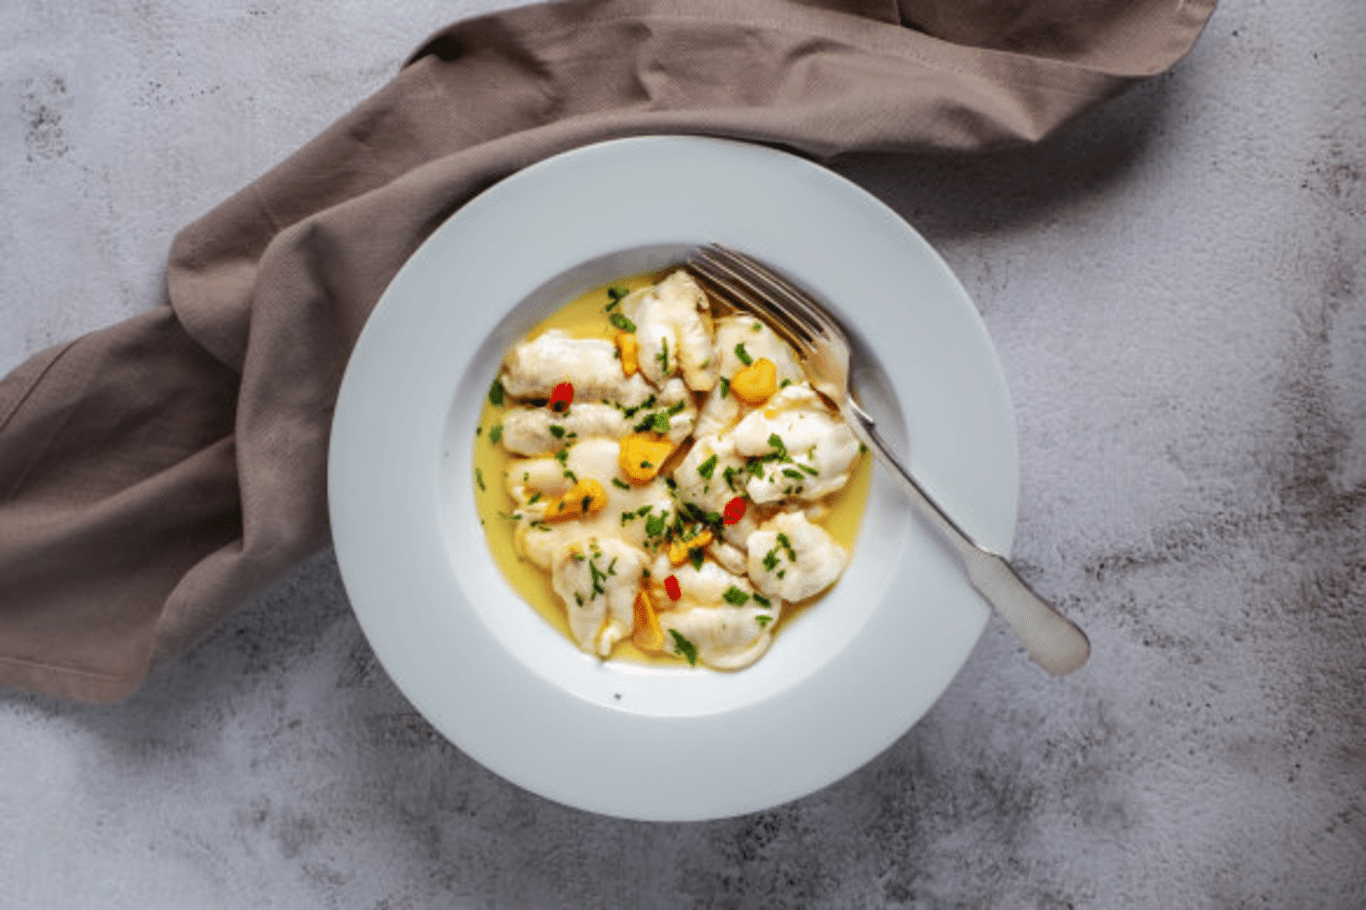 Discover the Surprising Fish Dish You Never Knew Existed